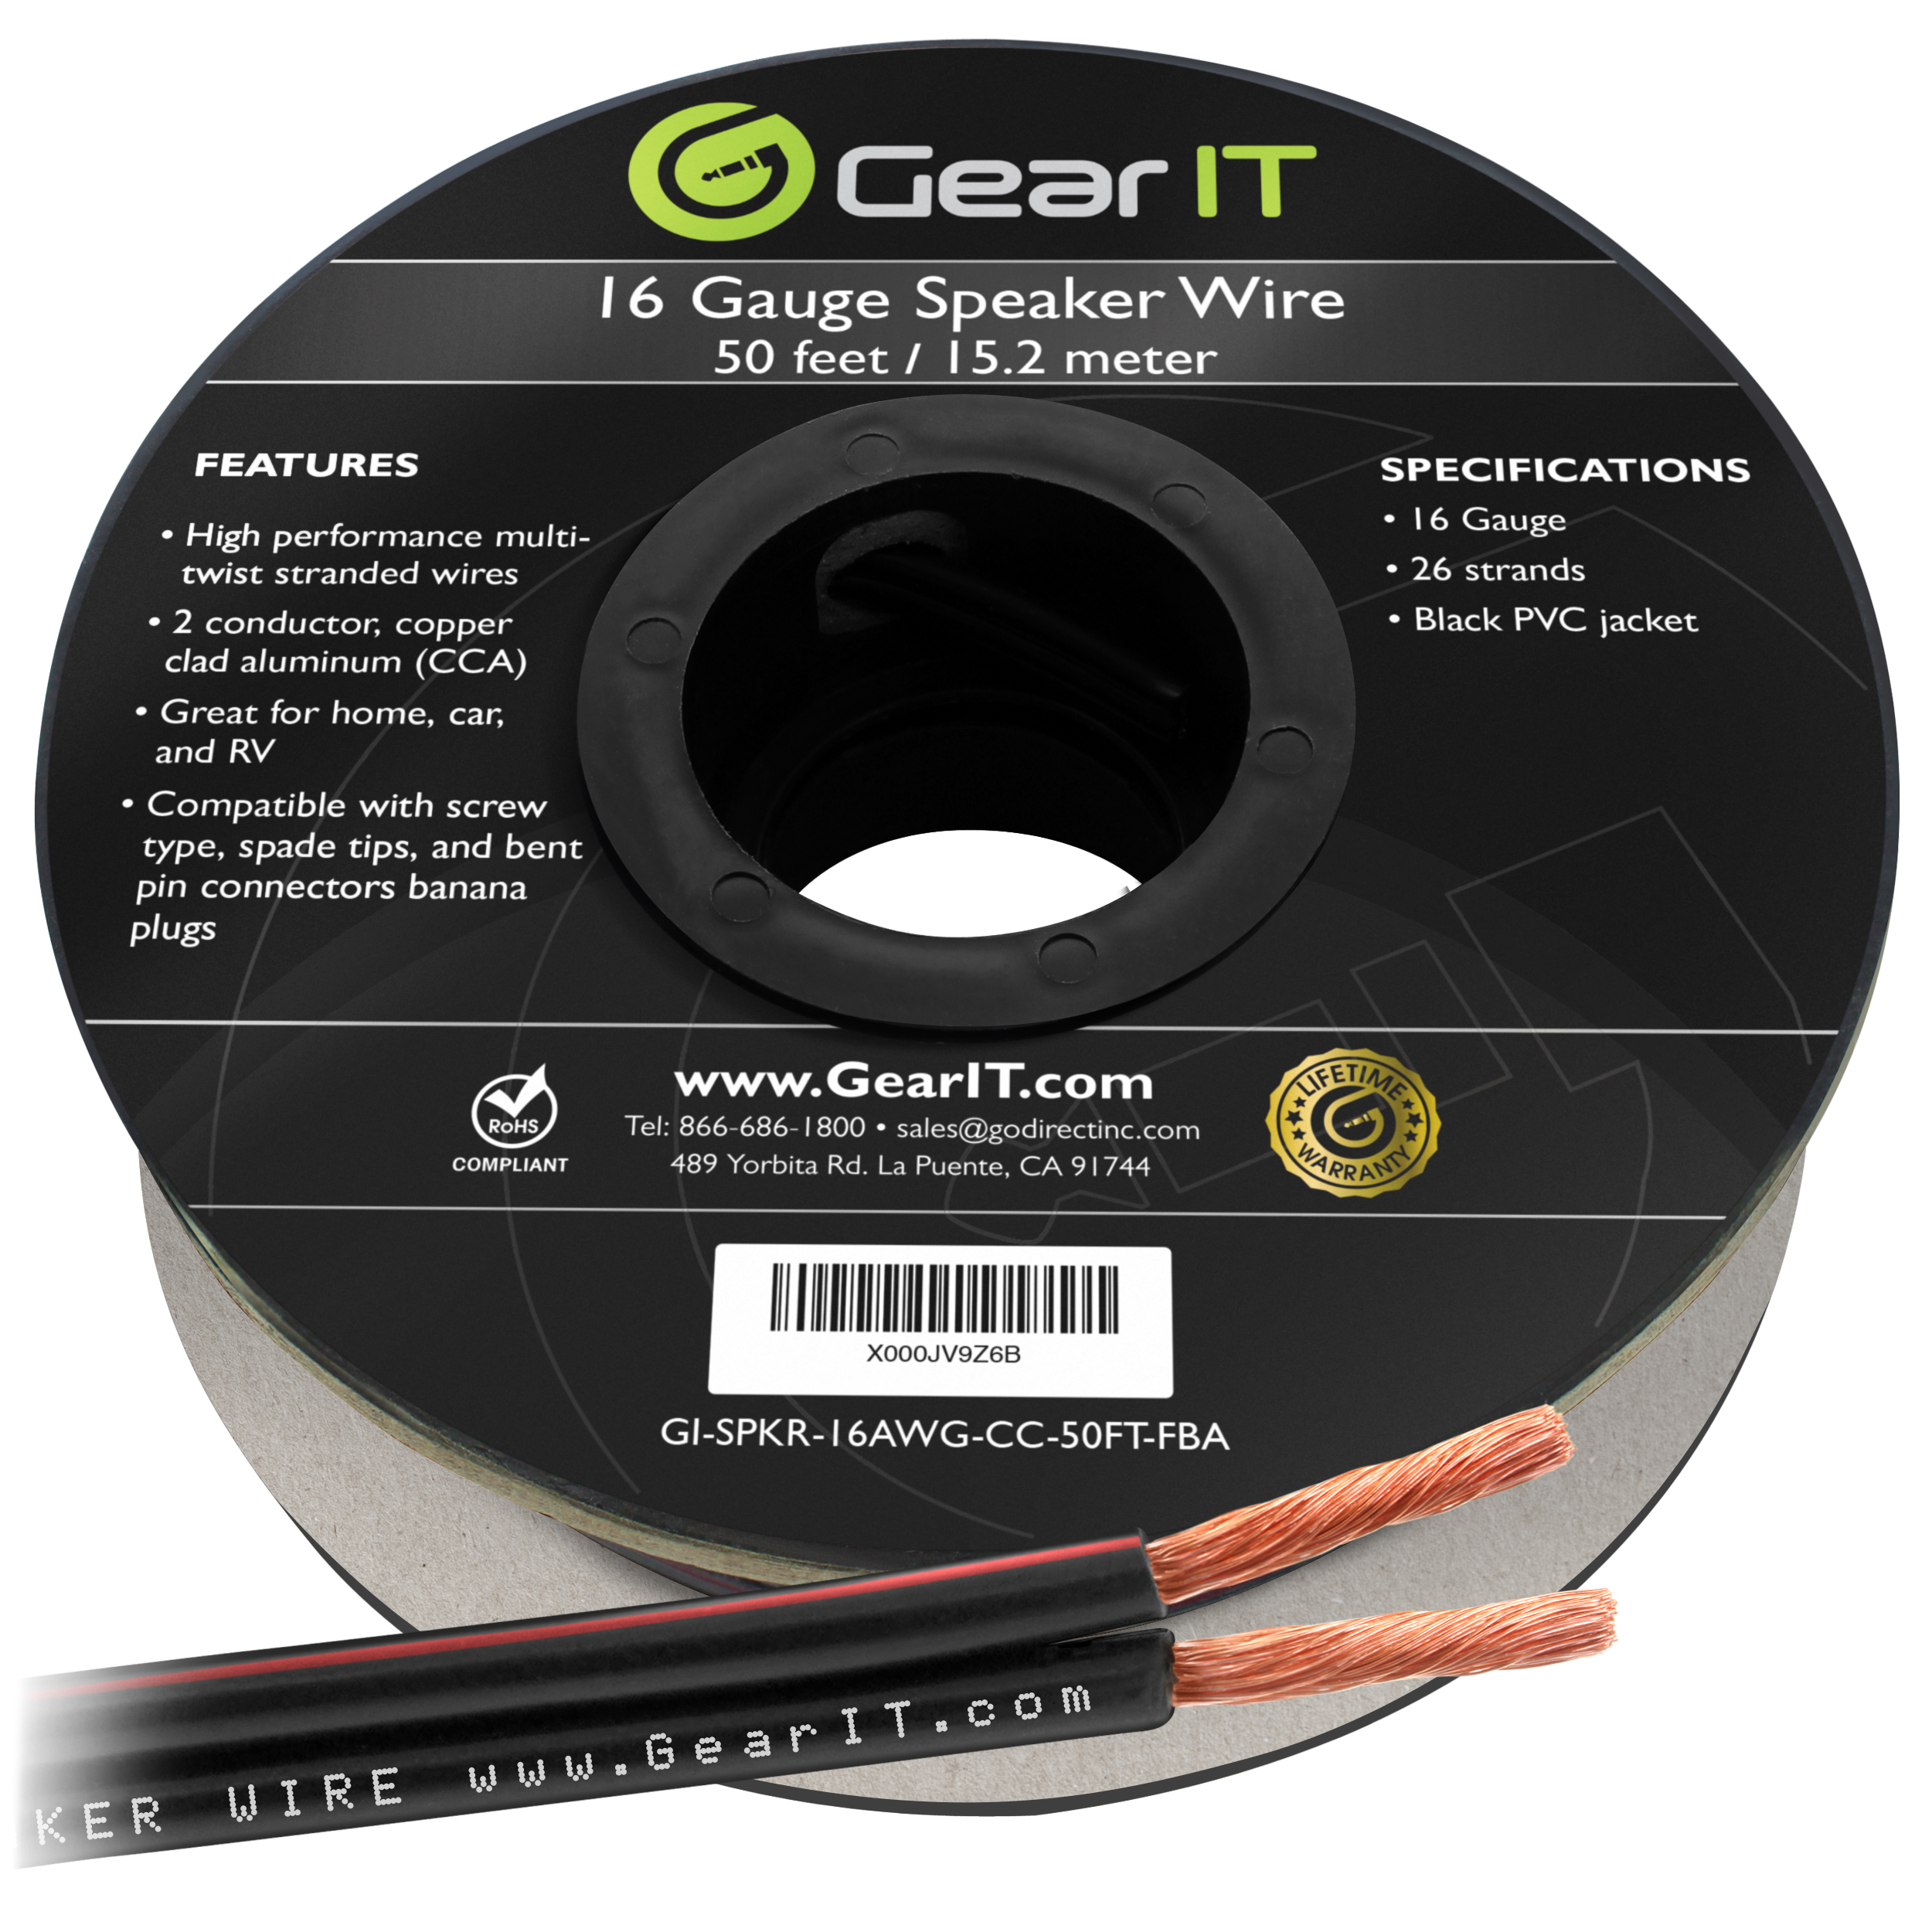 16AWG Speaker Wire, GearIT Pro Series 16 Gauge Speaker Wire Cable (50 Feet / 15 Meters) Great Use for Home Theater Speakers and Car Speakers, Black - image 1 of 7